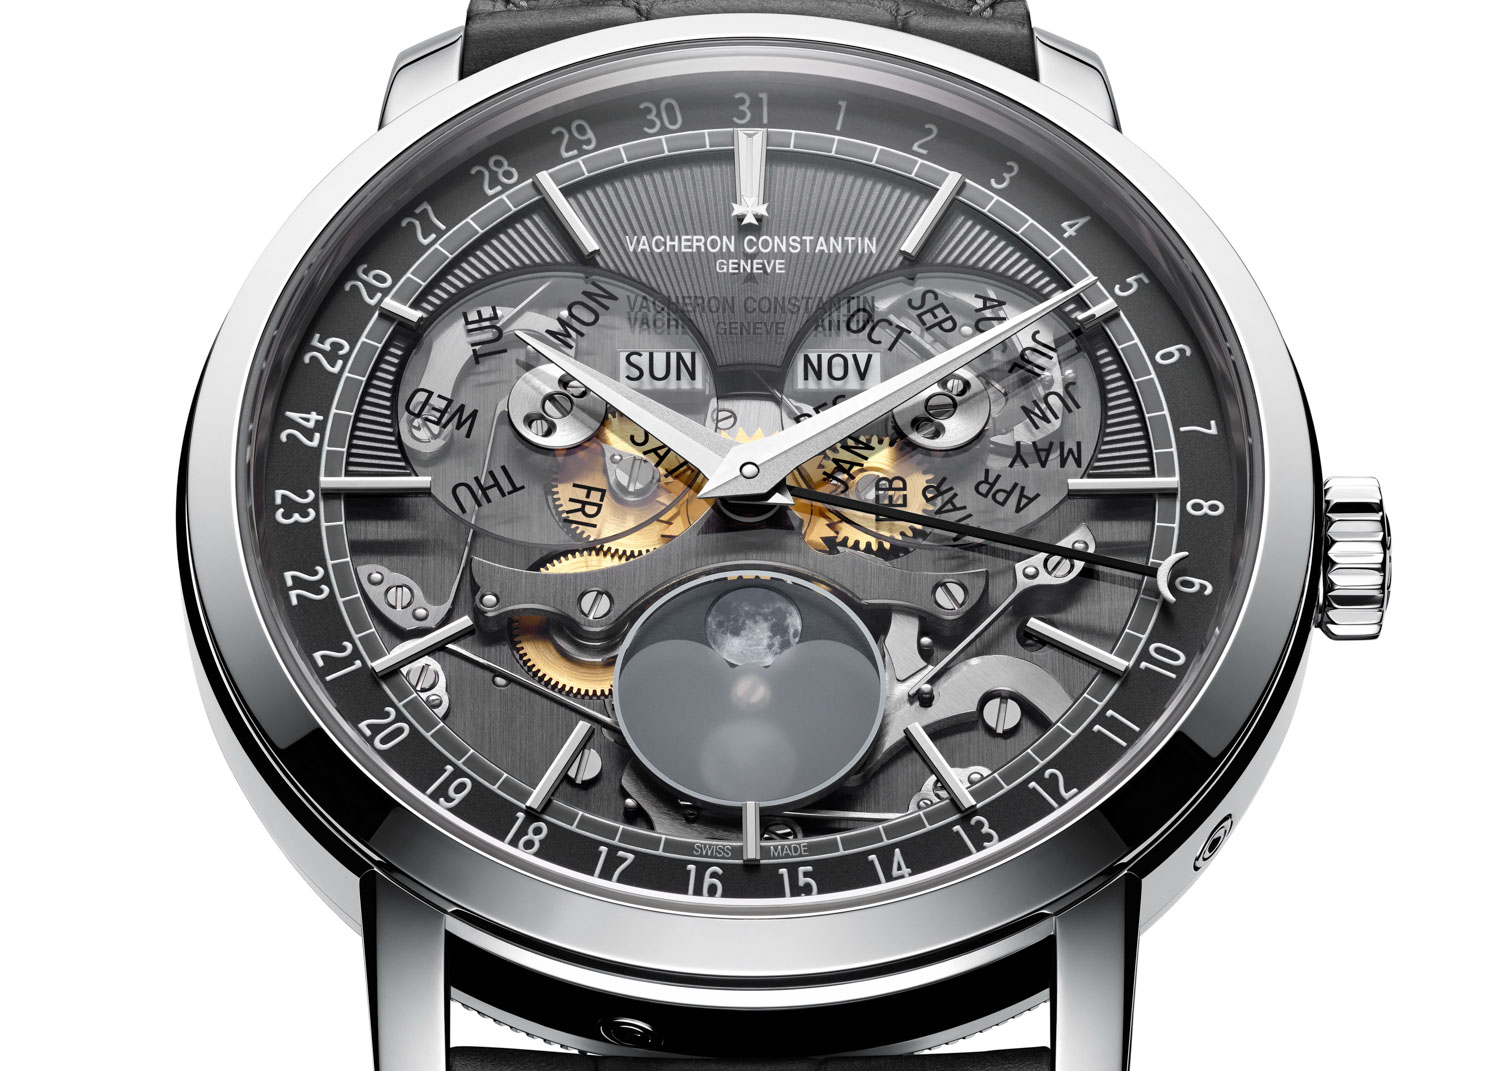 The Vacheron Constantin Traditionnelle Complete Calendar Openface in 18K white gold